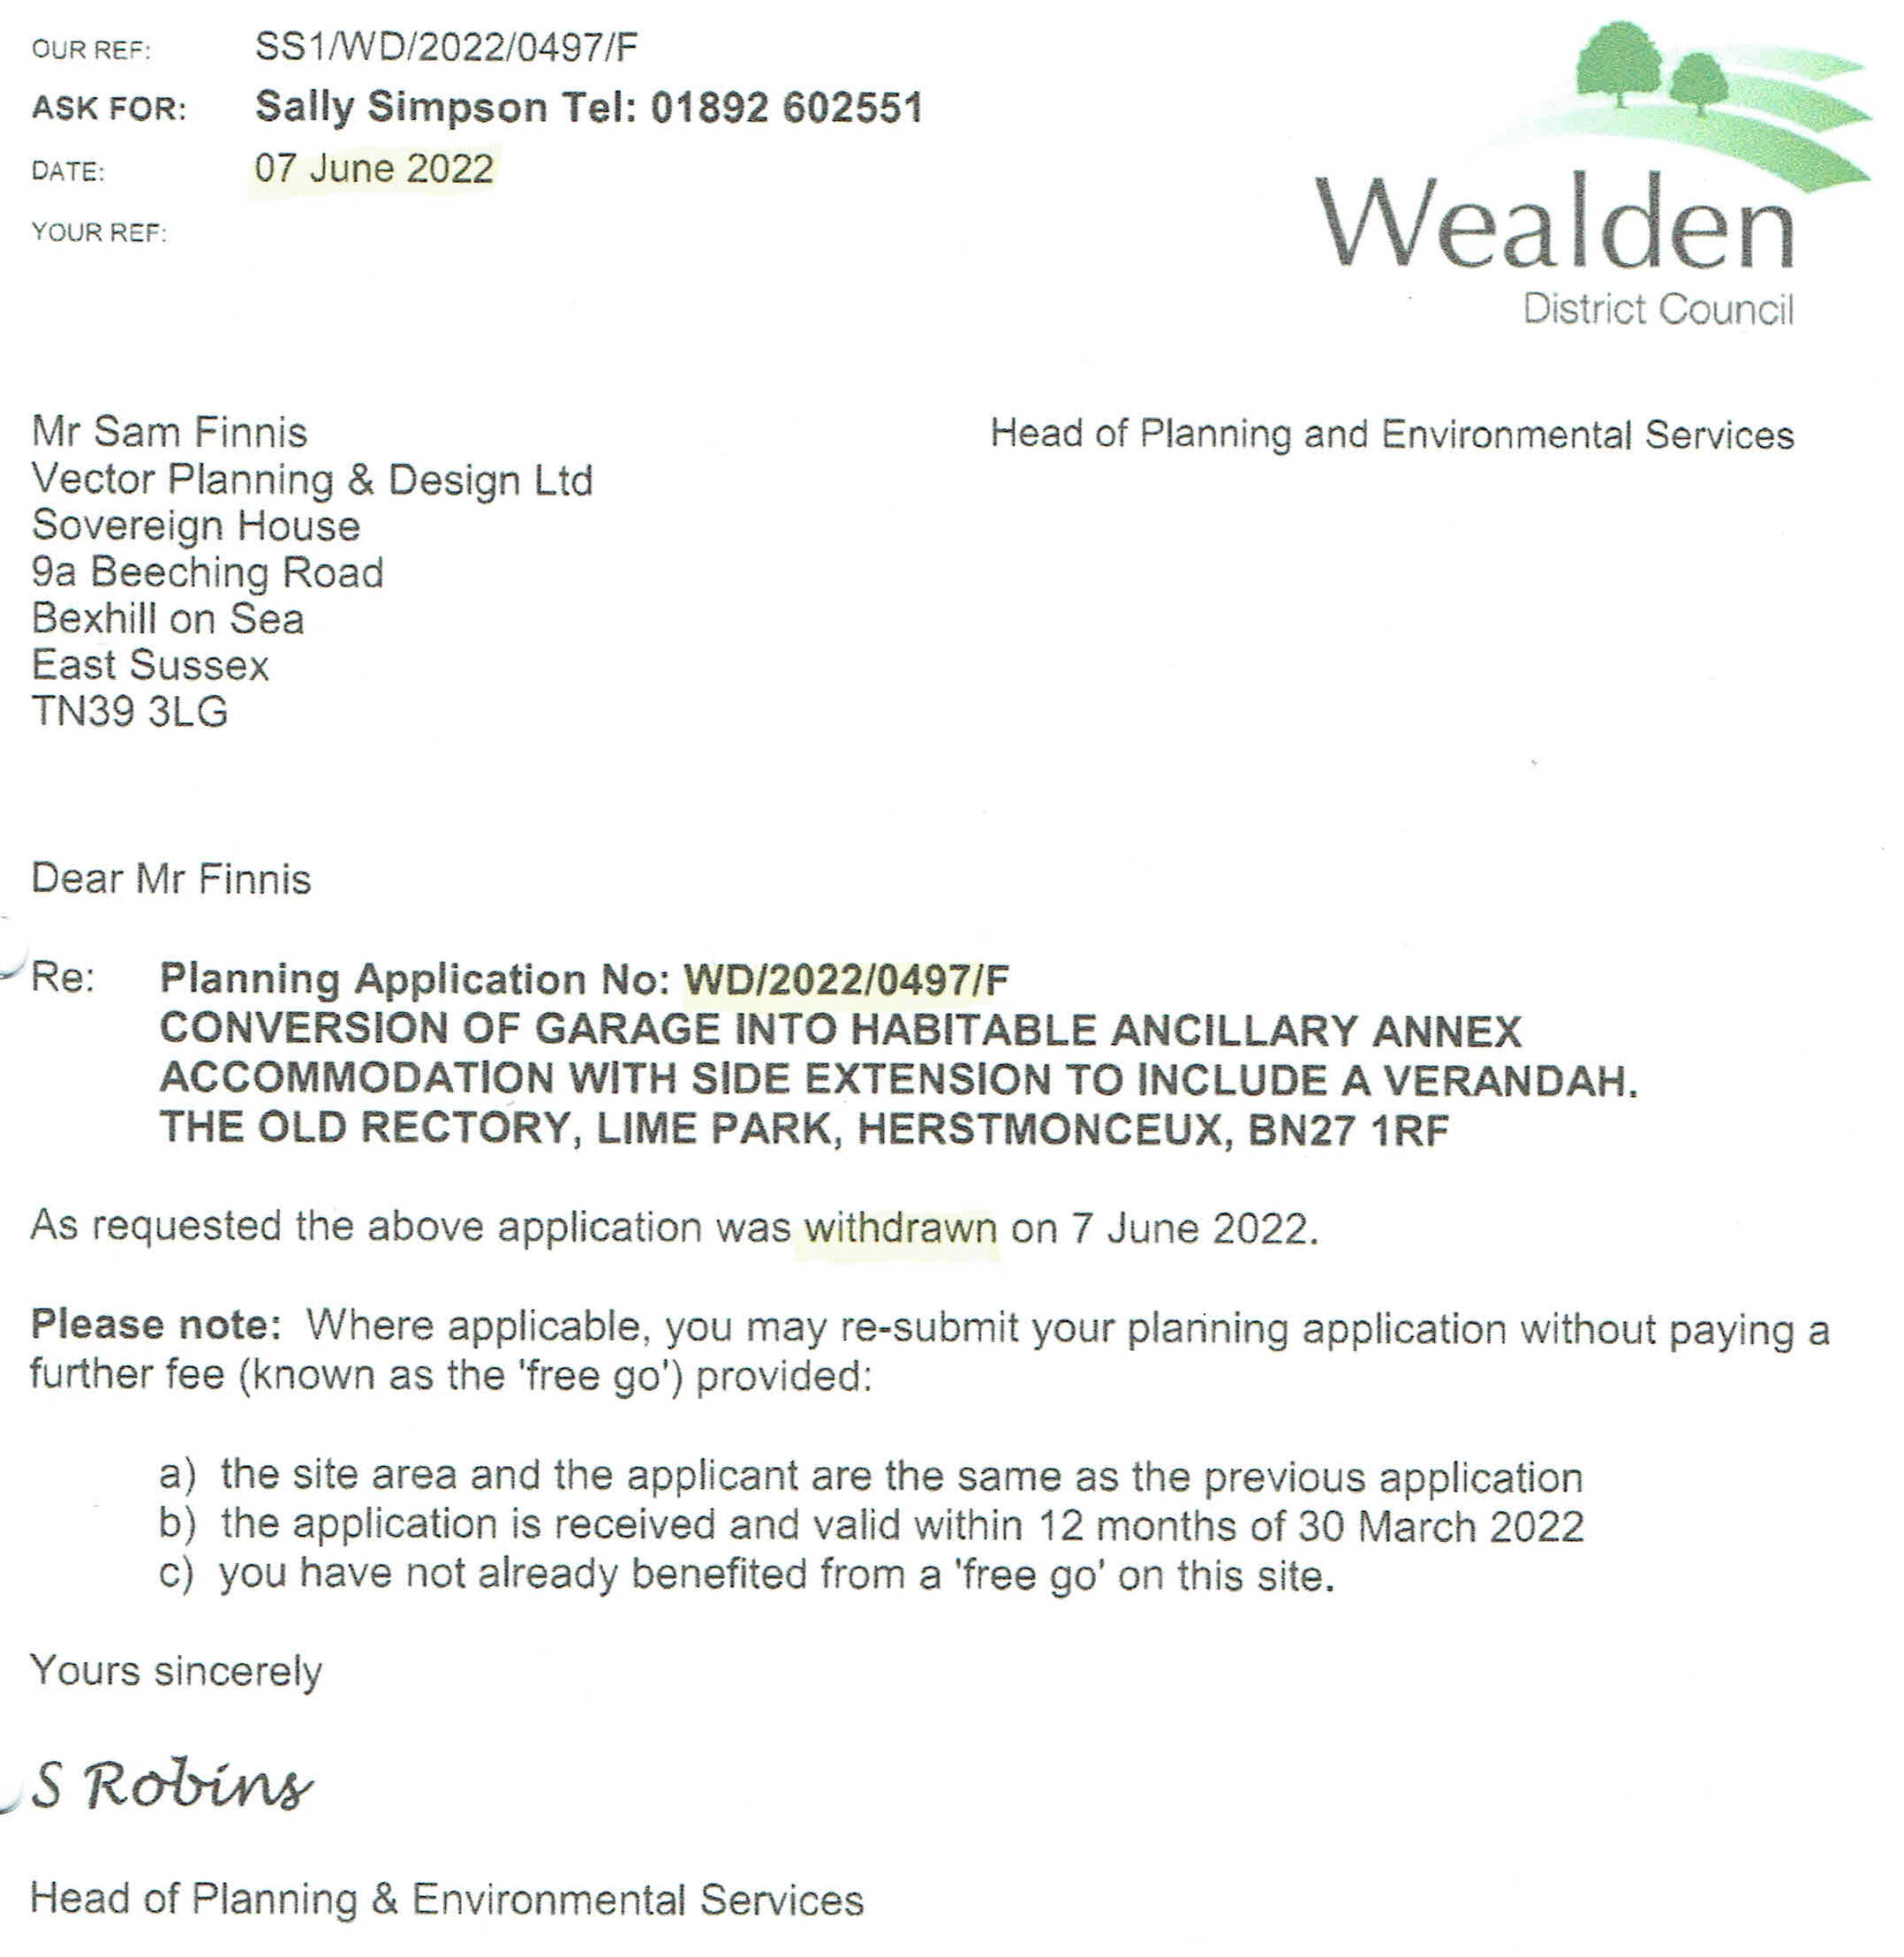 Planning application WD/2022/0497/F was withdrawn 7 June, sincerely Stacey Robbins